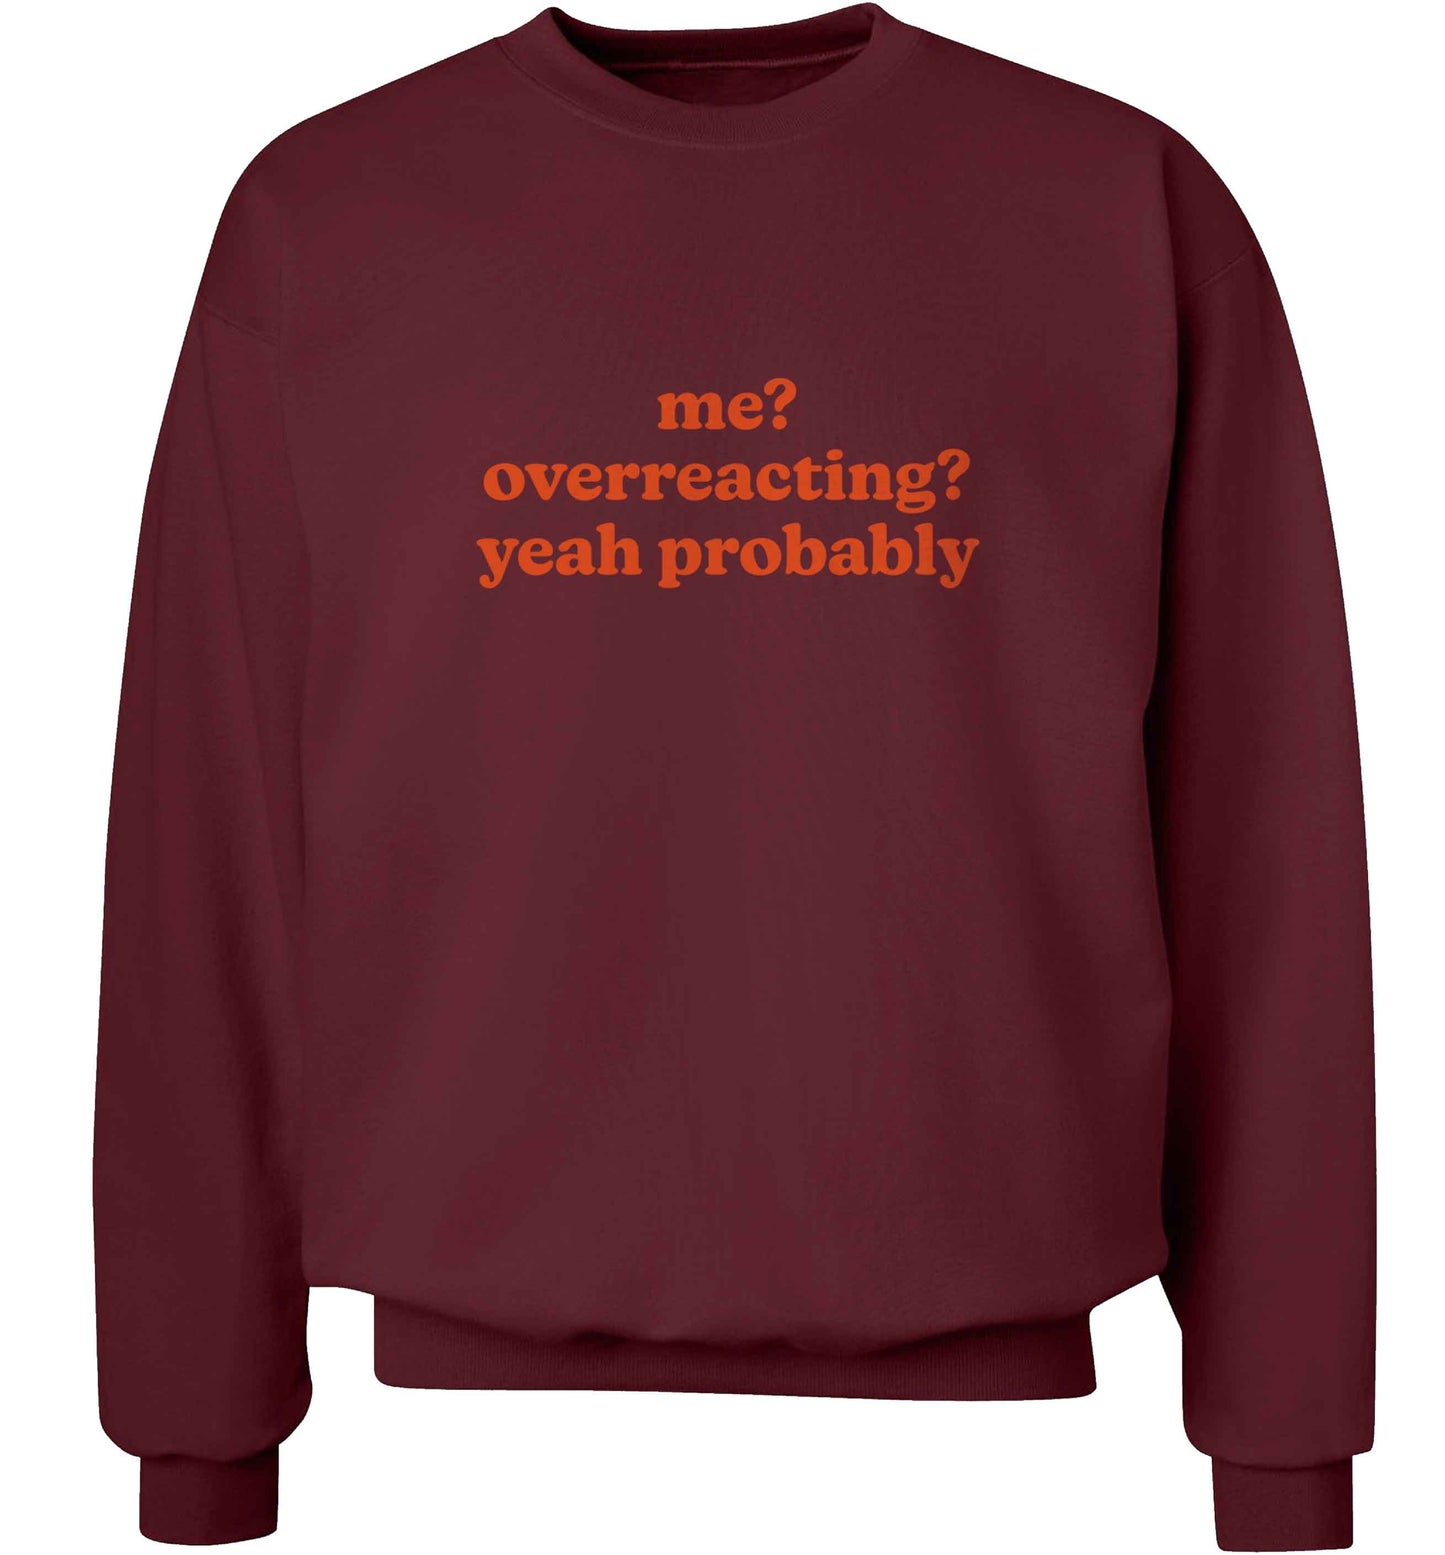 Me? Overreacting? Yeah probably adult's unisex maroon sweater 2XL